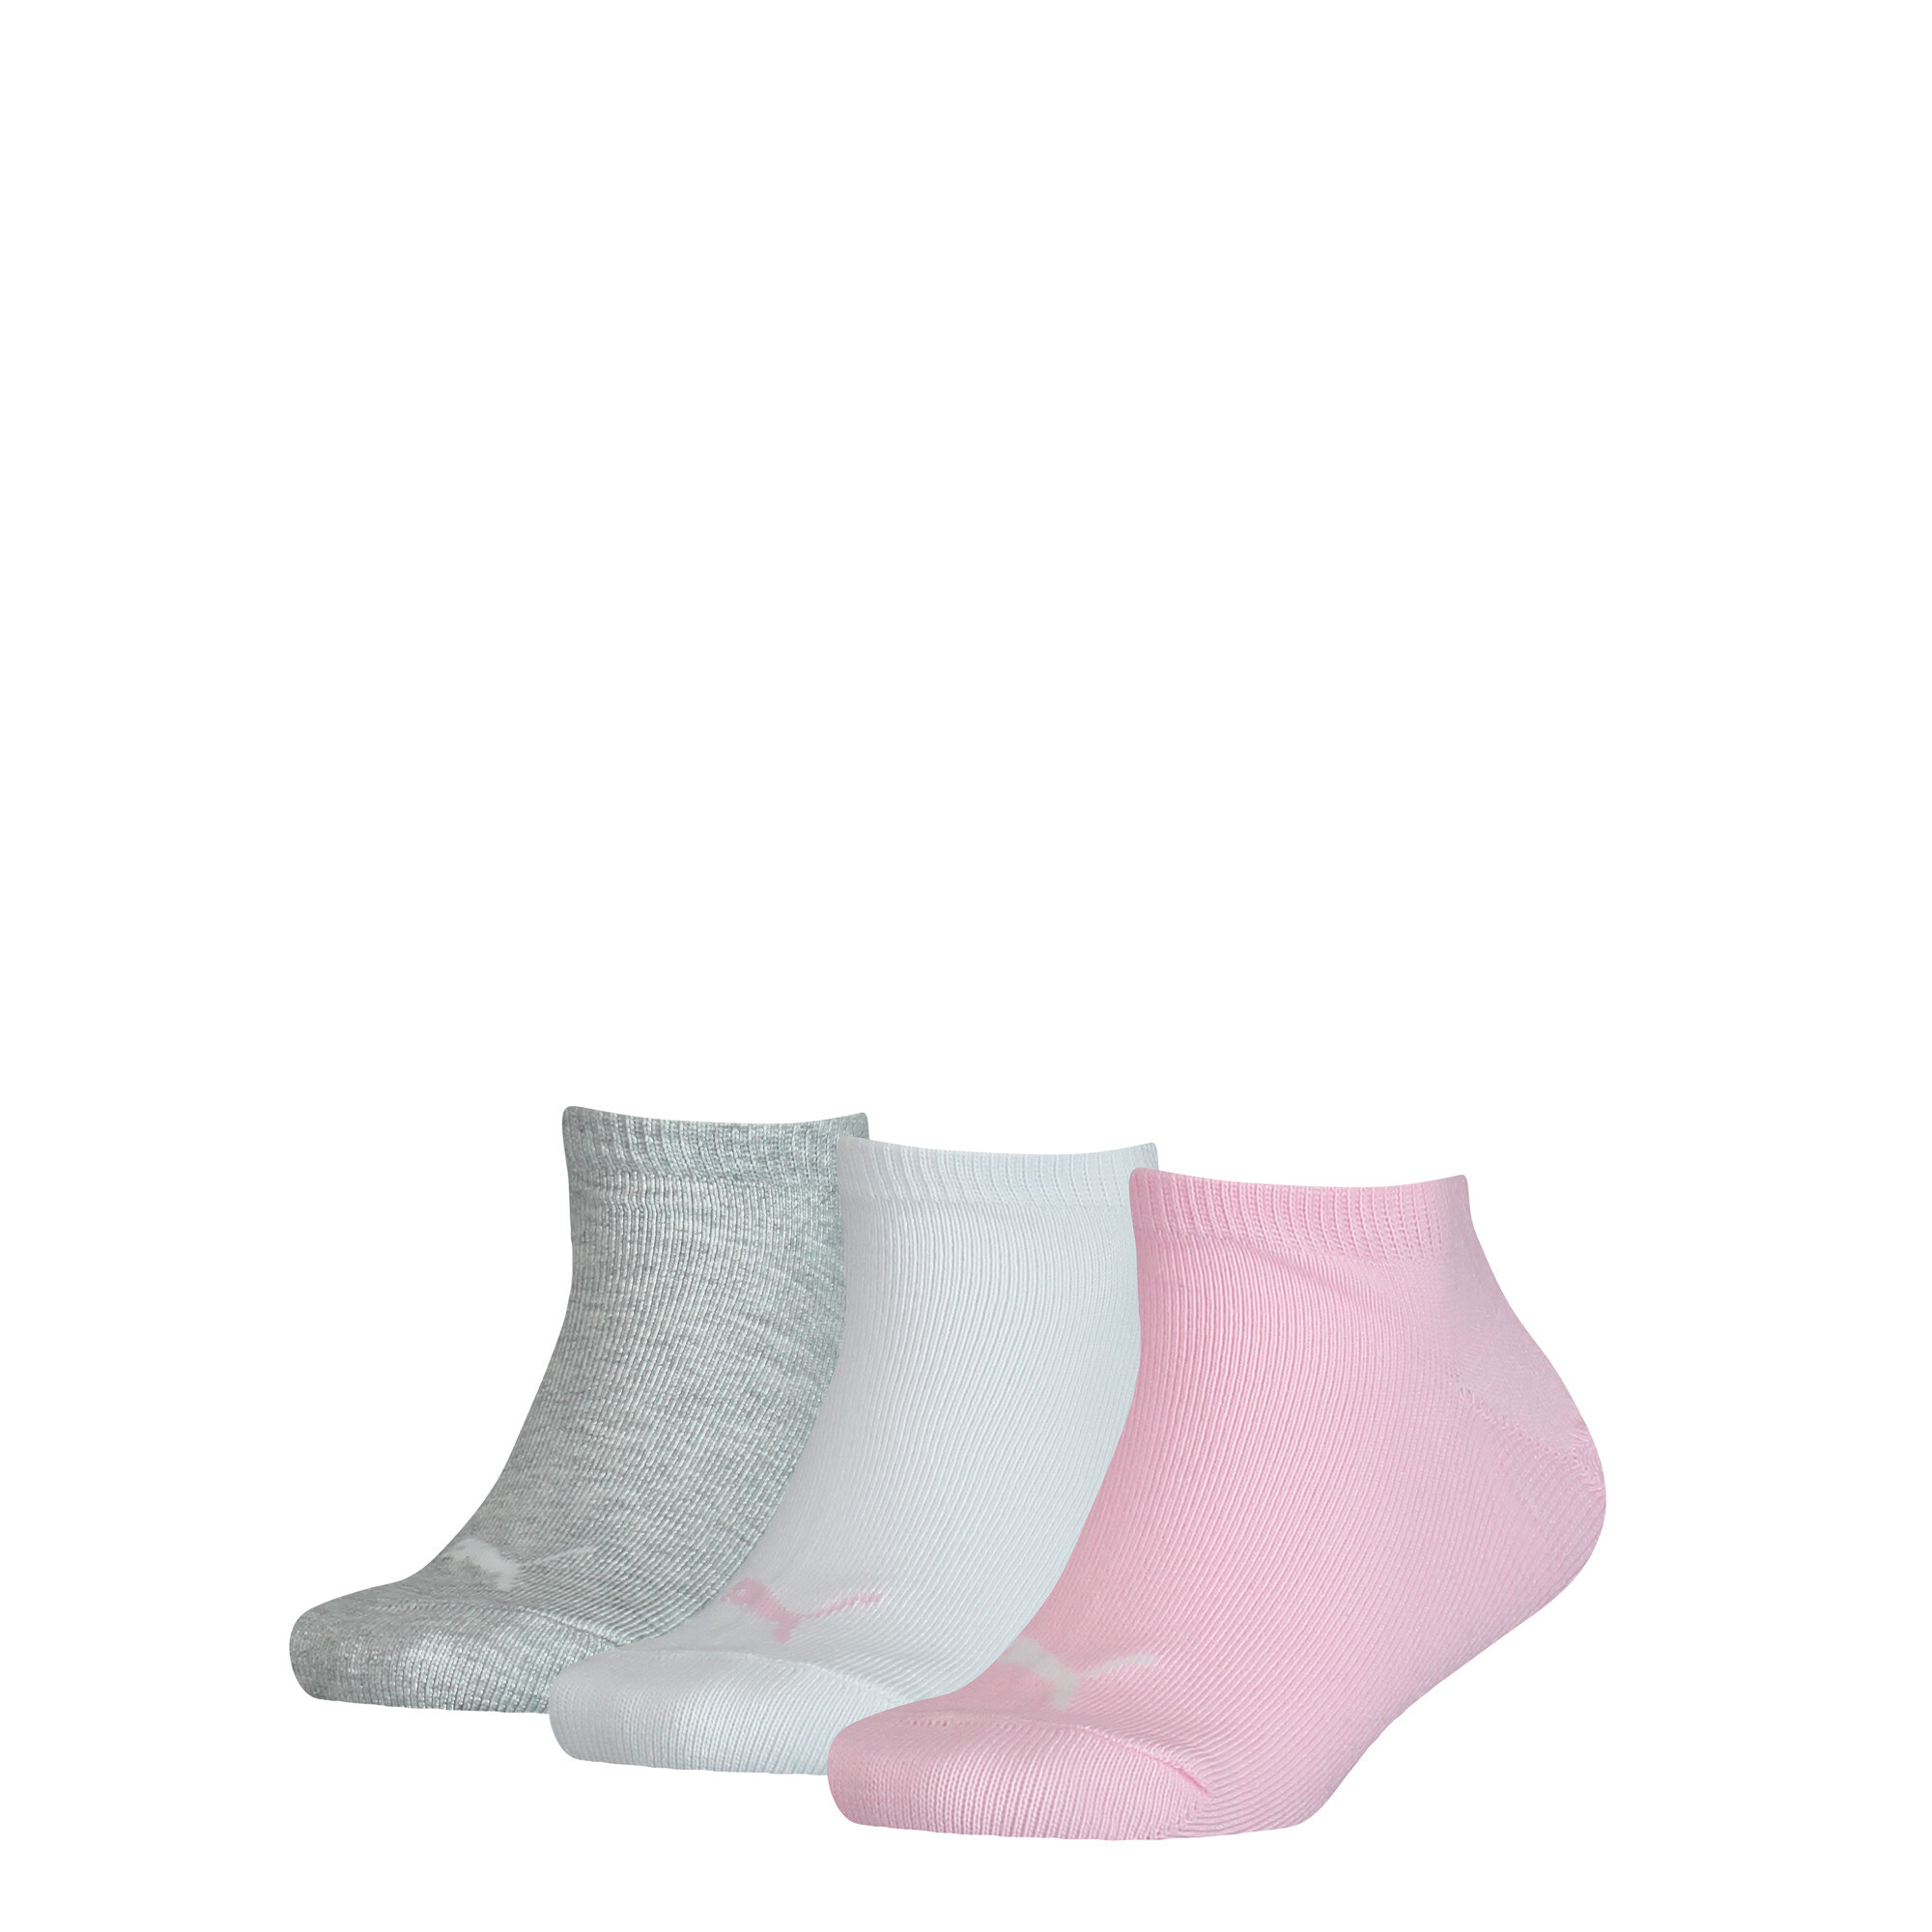 Kids' PUMA Invisible Socks 3 Pack In Rose Water, Size 31-34